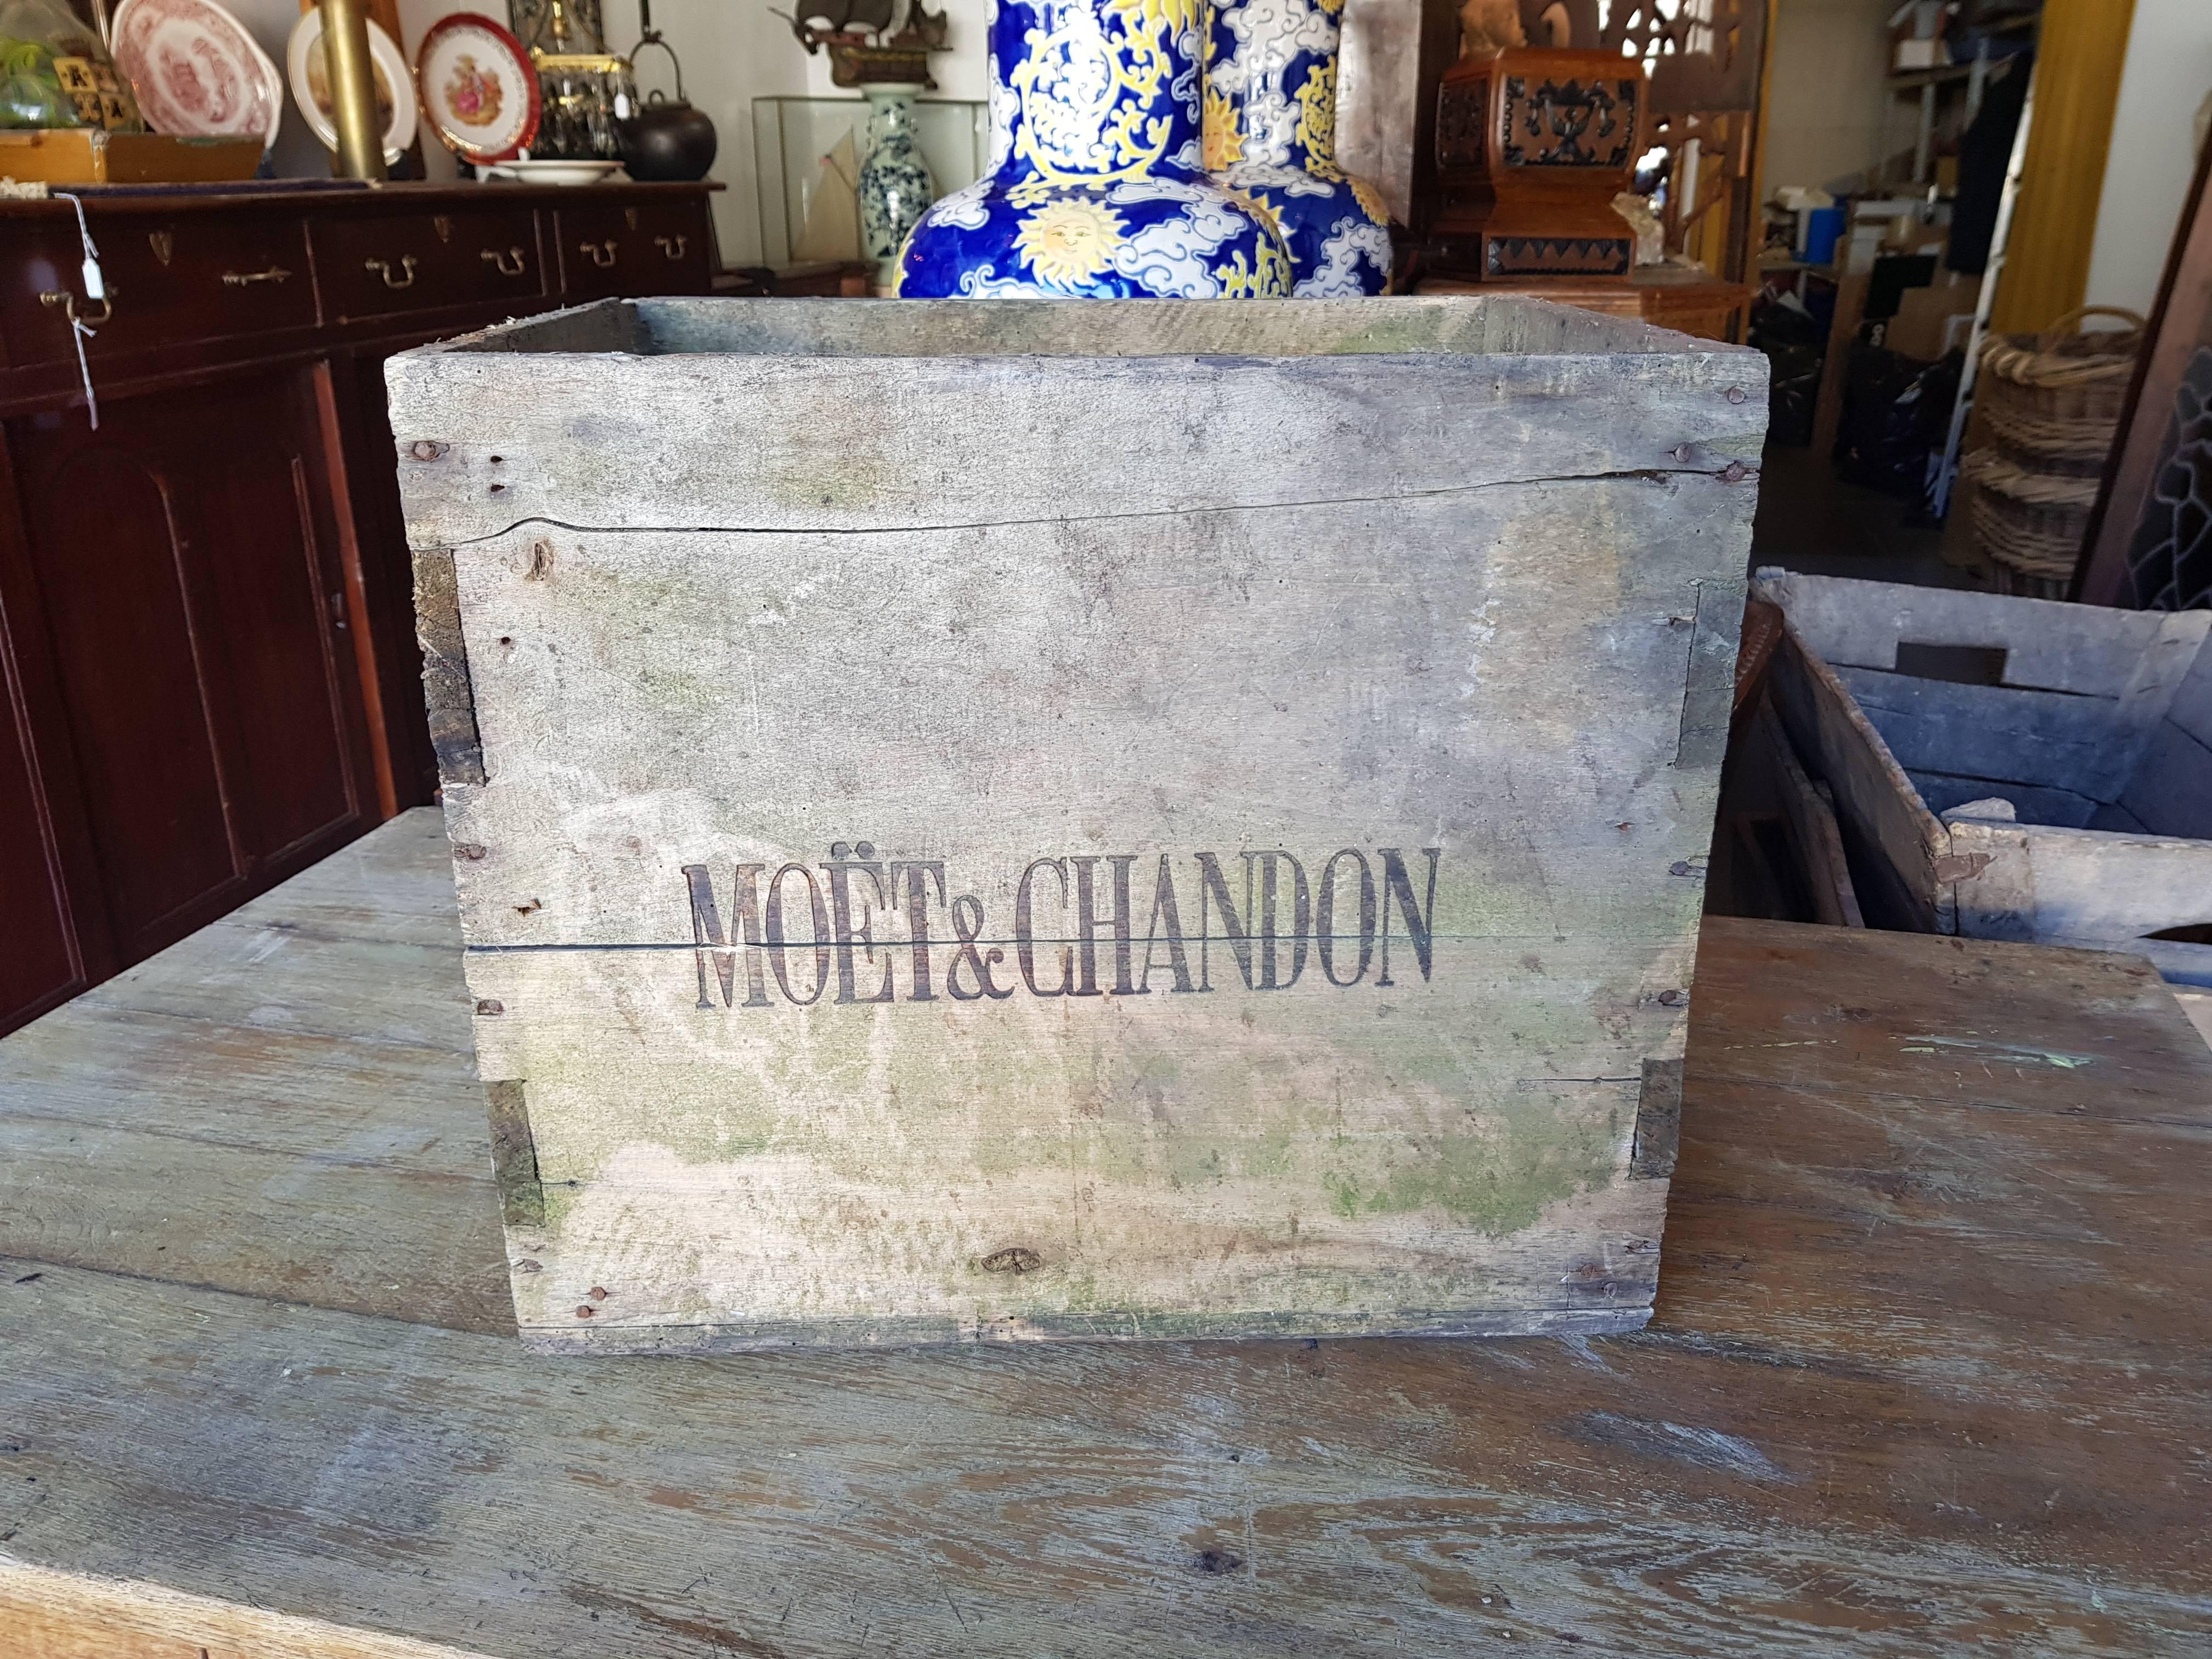 Very rare early 20th century French double-sided Moet & Chandon box for champagne bottles.

The measurements are,
Depth 39 cm/ 15.3 inch.
Width 50 cm/ 19.6 inch.
Height 42 cm/ 16.5 inch.
 